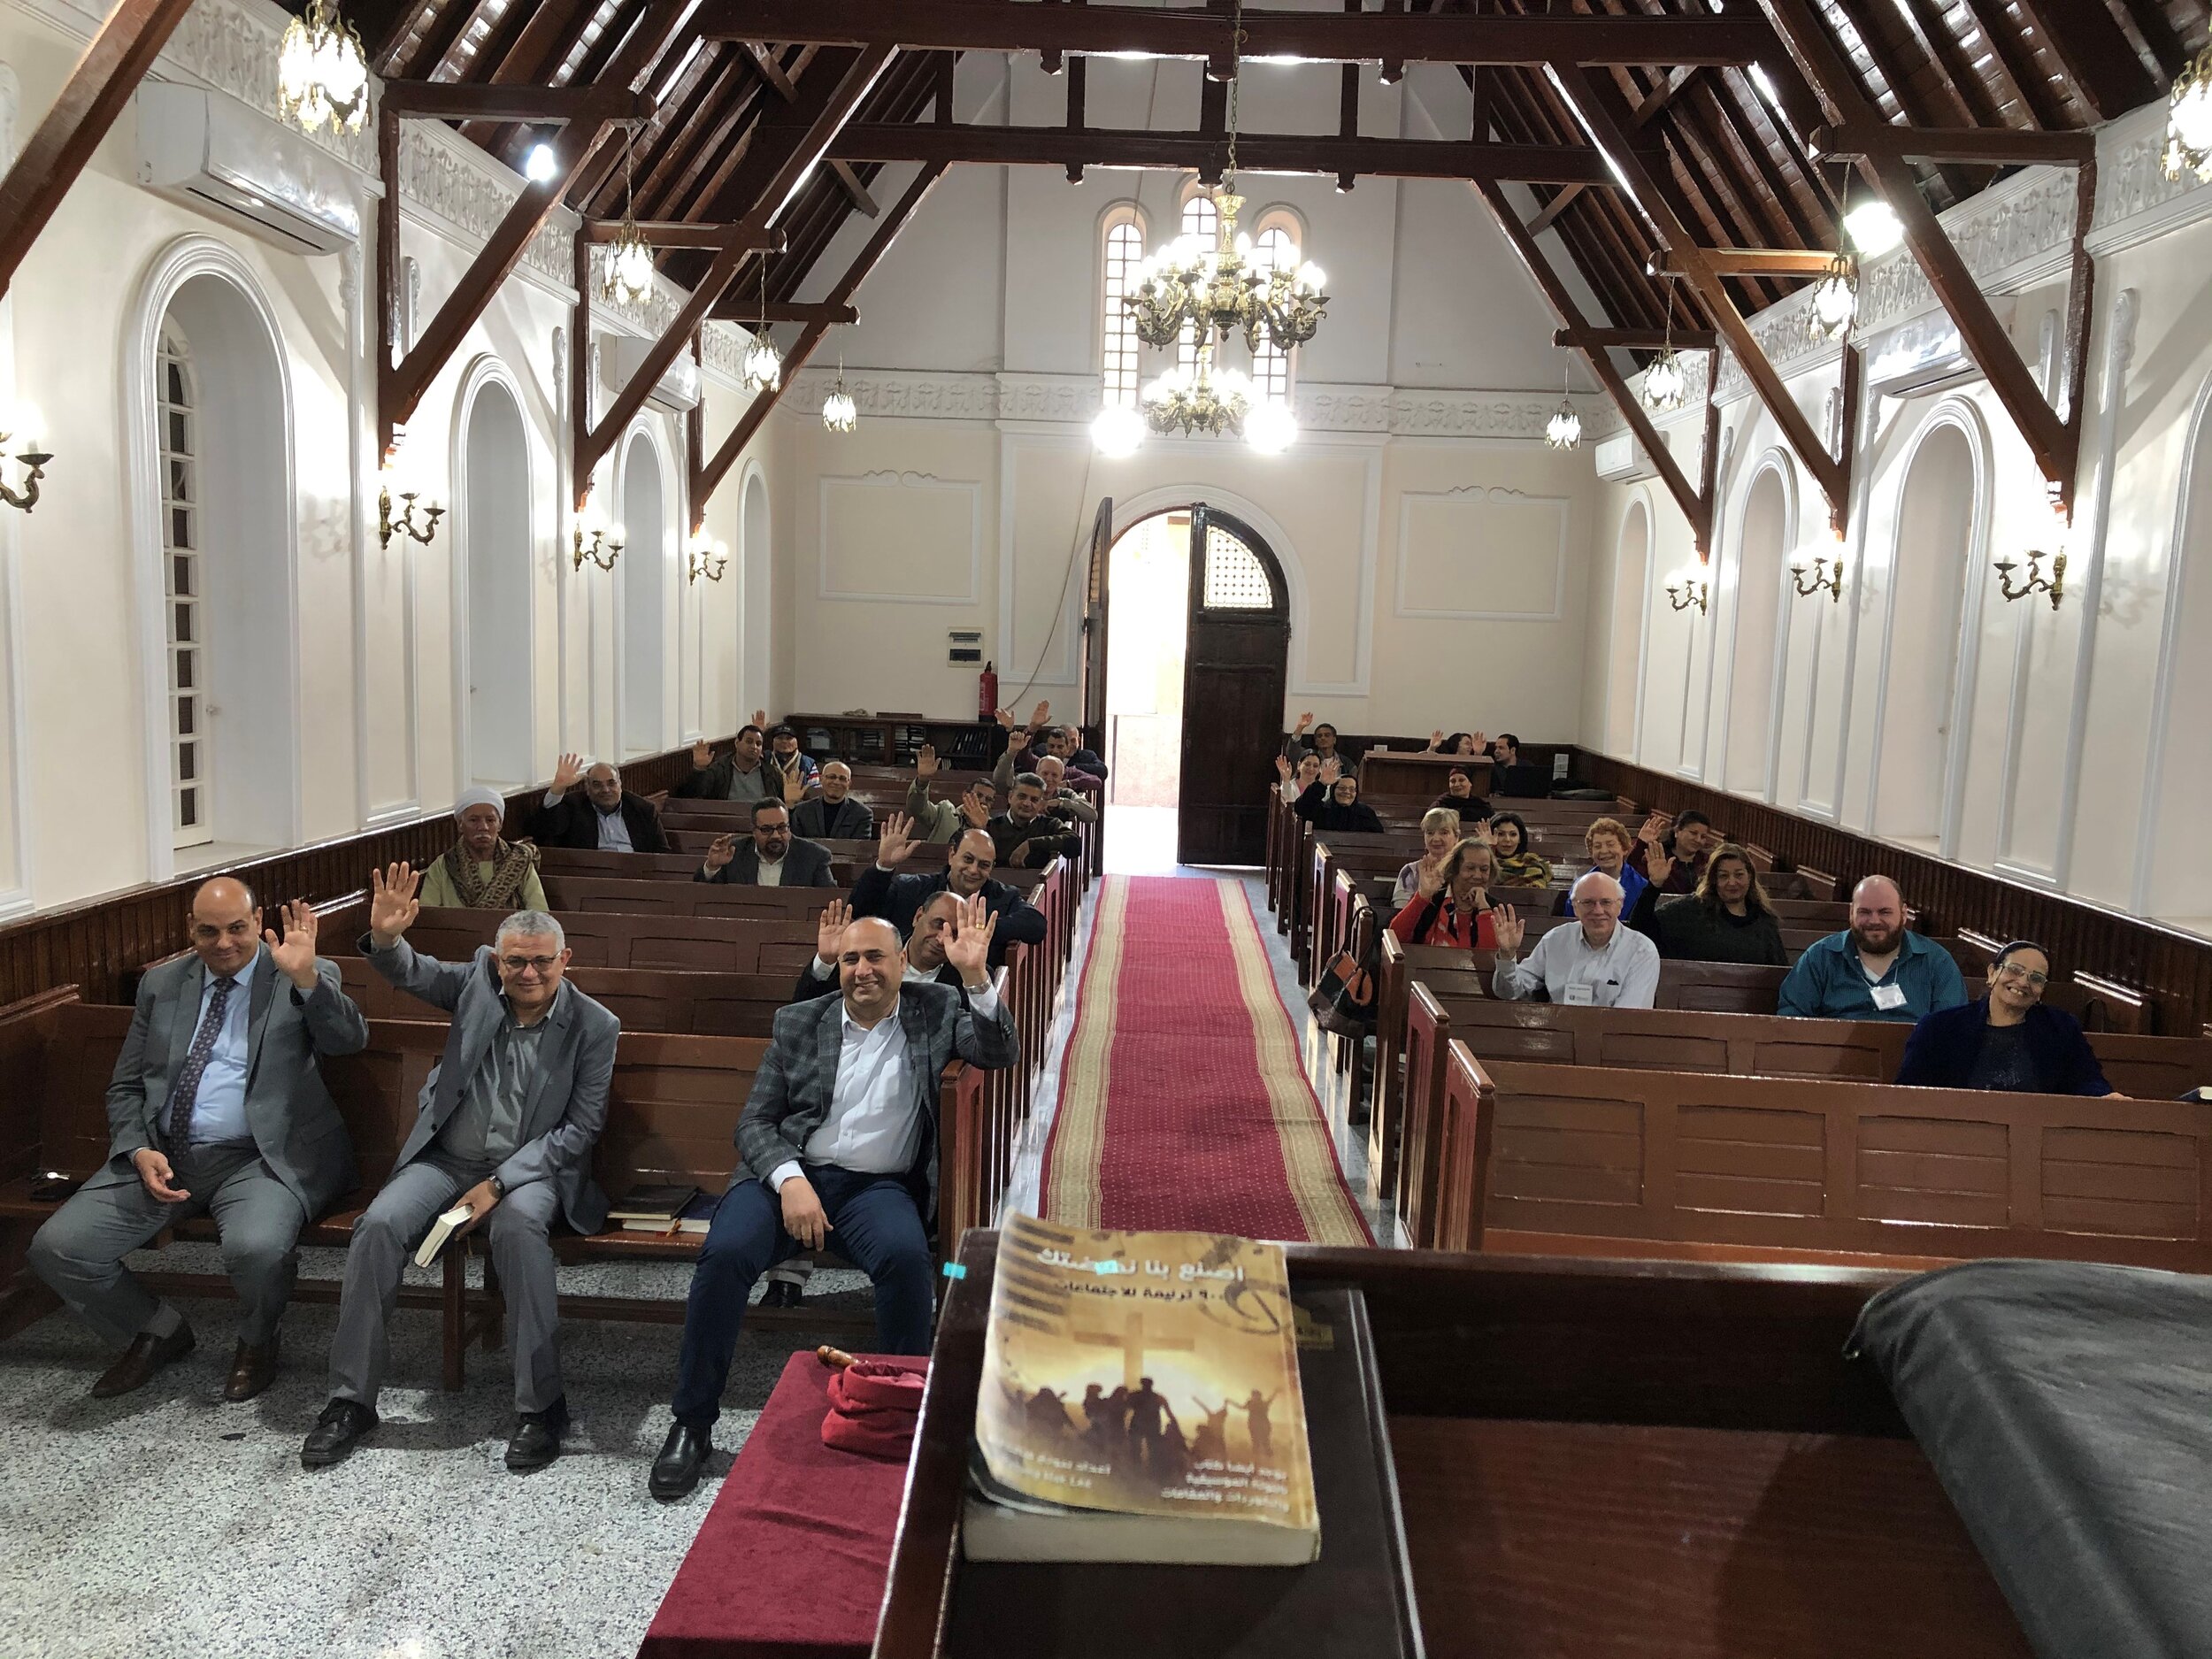  The congregation in Ismailia, on the Suez Canal, send their greetings 